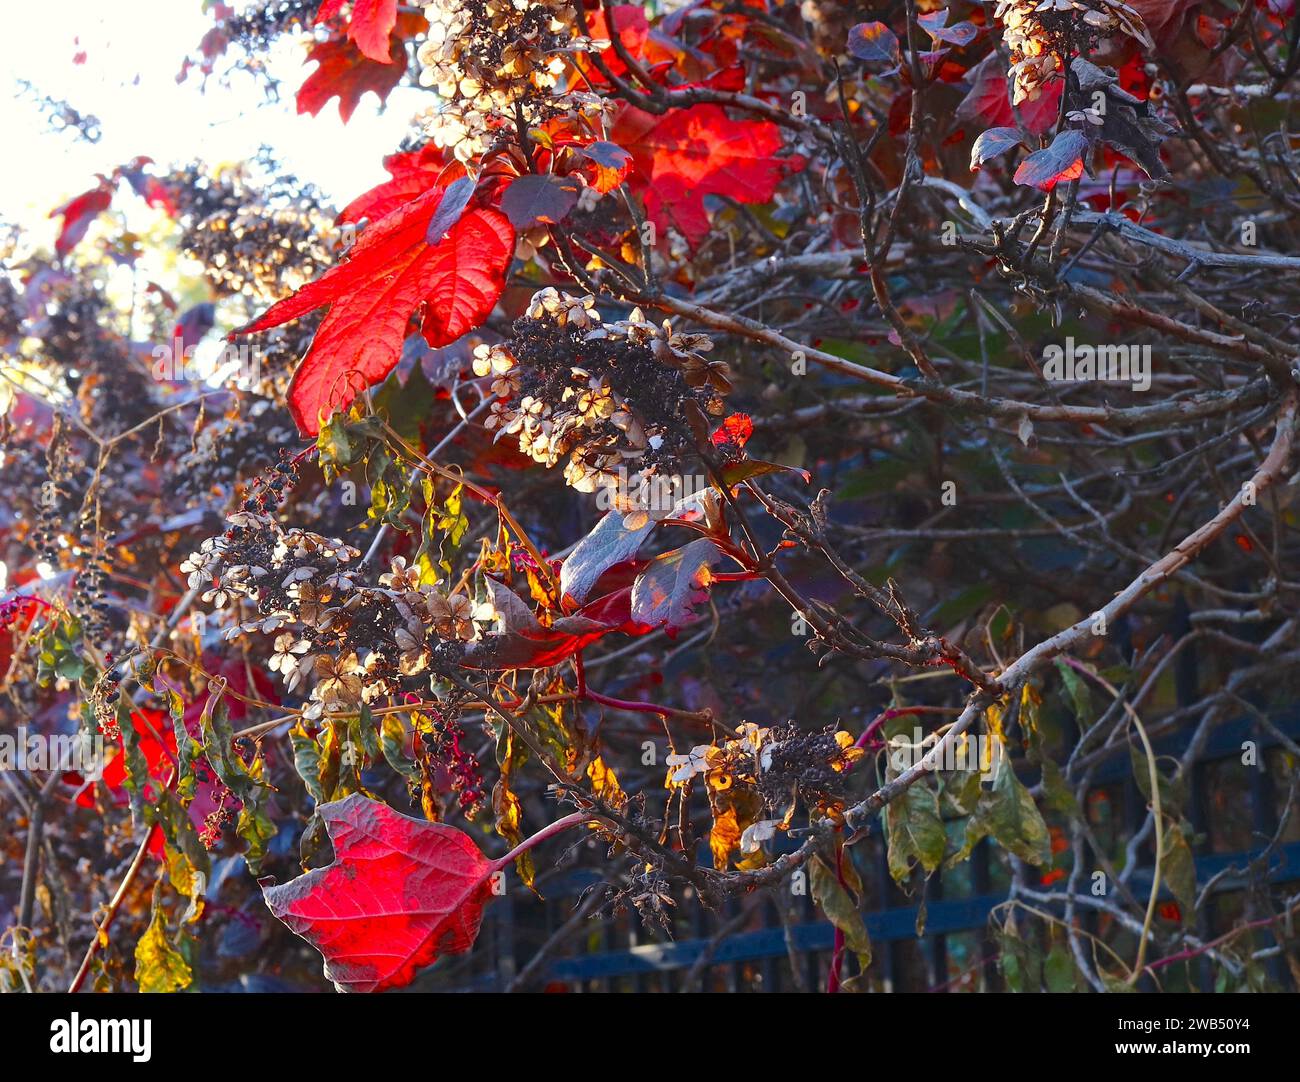 Colorful Red Shrubs in Autumn Show Off Nature's Gifts of Berries and Blossoms Stock Photo